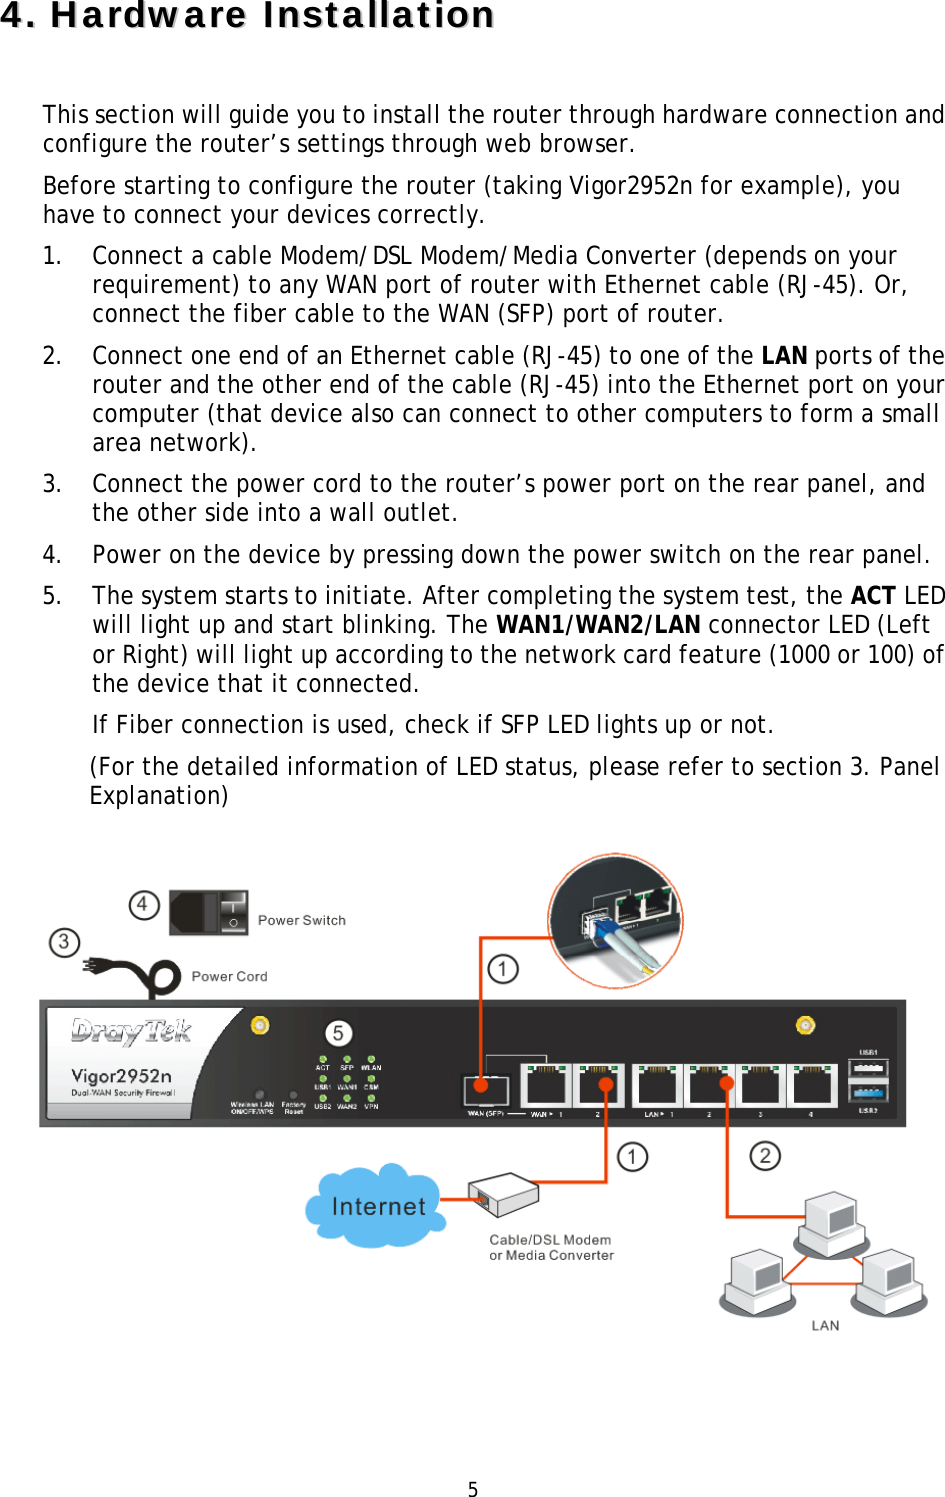   5 44..  HHaarrddwwaarree  IInnssttaallllaattiioonn  This section will guide you to install the router through hardware connection and configure the router’s settings through web browser.   Before starting to configure the router (taking Vigor2952n for example), you have to connect your devices correctly. 1. Connect a cable Modem/DSL Modem/Media Converter (depends on your requirement) to any WAN port of router with Ethernet cable (RJ-45). Or, connect the fiber cable to the WAN (SFP) port of router. 2. Connect one end of an Ethernet cable (RJ-45) to one of the LAN ports of the router and the other end of the cable (RJ-45) into the Ethernet port on your computer (that device also can connect to other computers to form a small area network). 3. Connect the power cord to the router’s power port on the rear panel, and the other side into a wall outlet.   4. Power on the device by pressing down the power switch on the rear panel. 5. The system starts to initiate. After completing the system test, the ACT LED will light up and start blinking. The WAN1/WAN2/LAN connector LED (Left or Right) will light up according to the network card feature (1000 or 100) of the device that it connected. If Fiber connection is used, check if SFP LED lights up or not.   (For the detailed information of LED status, please refer to section 3. Panel Explanation)   